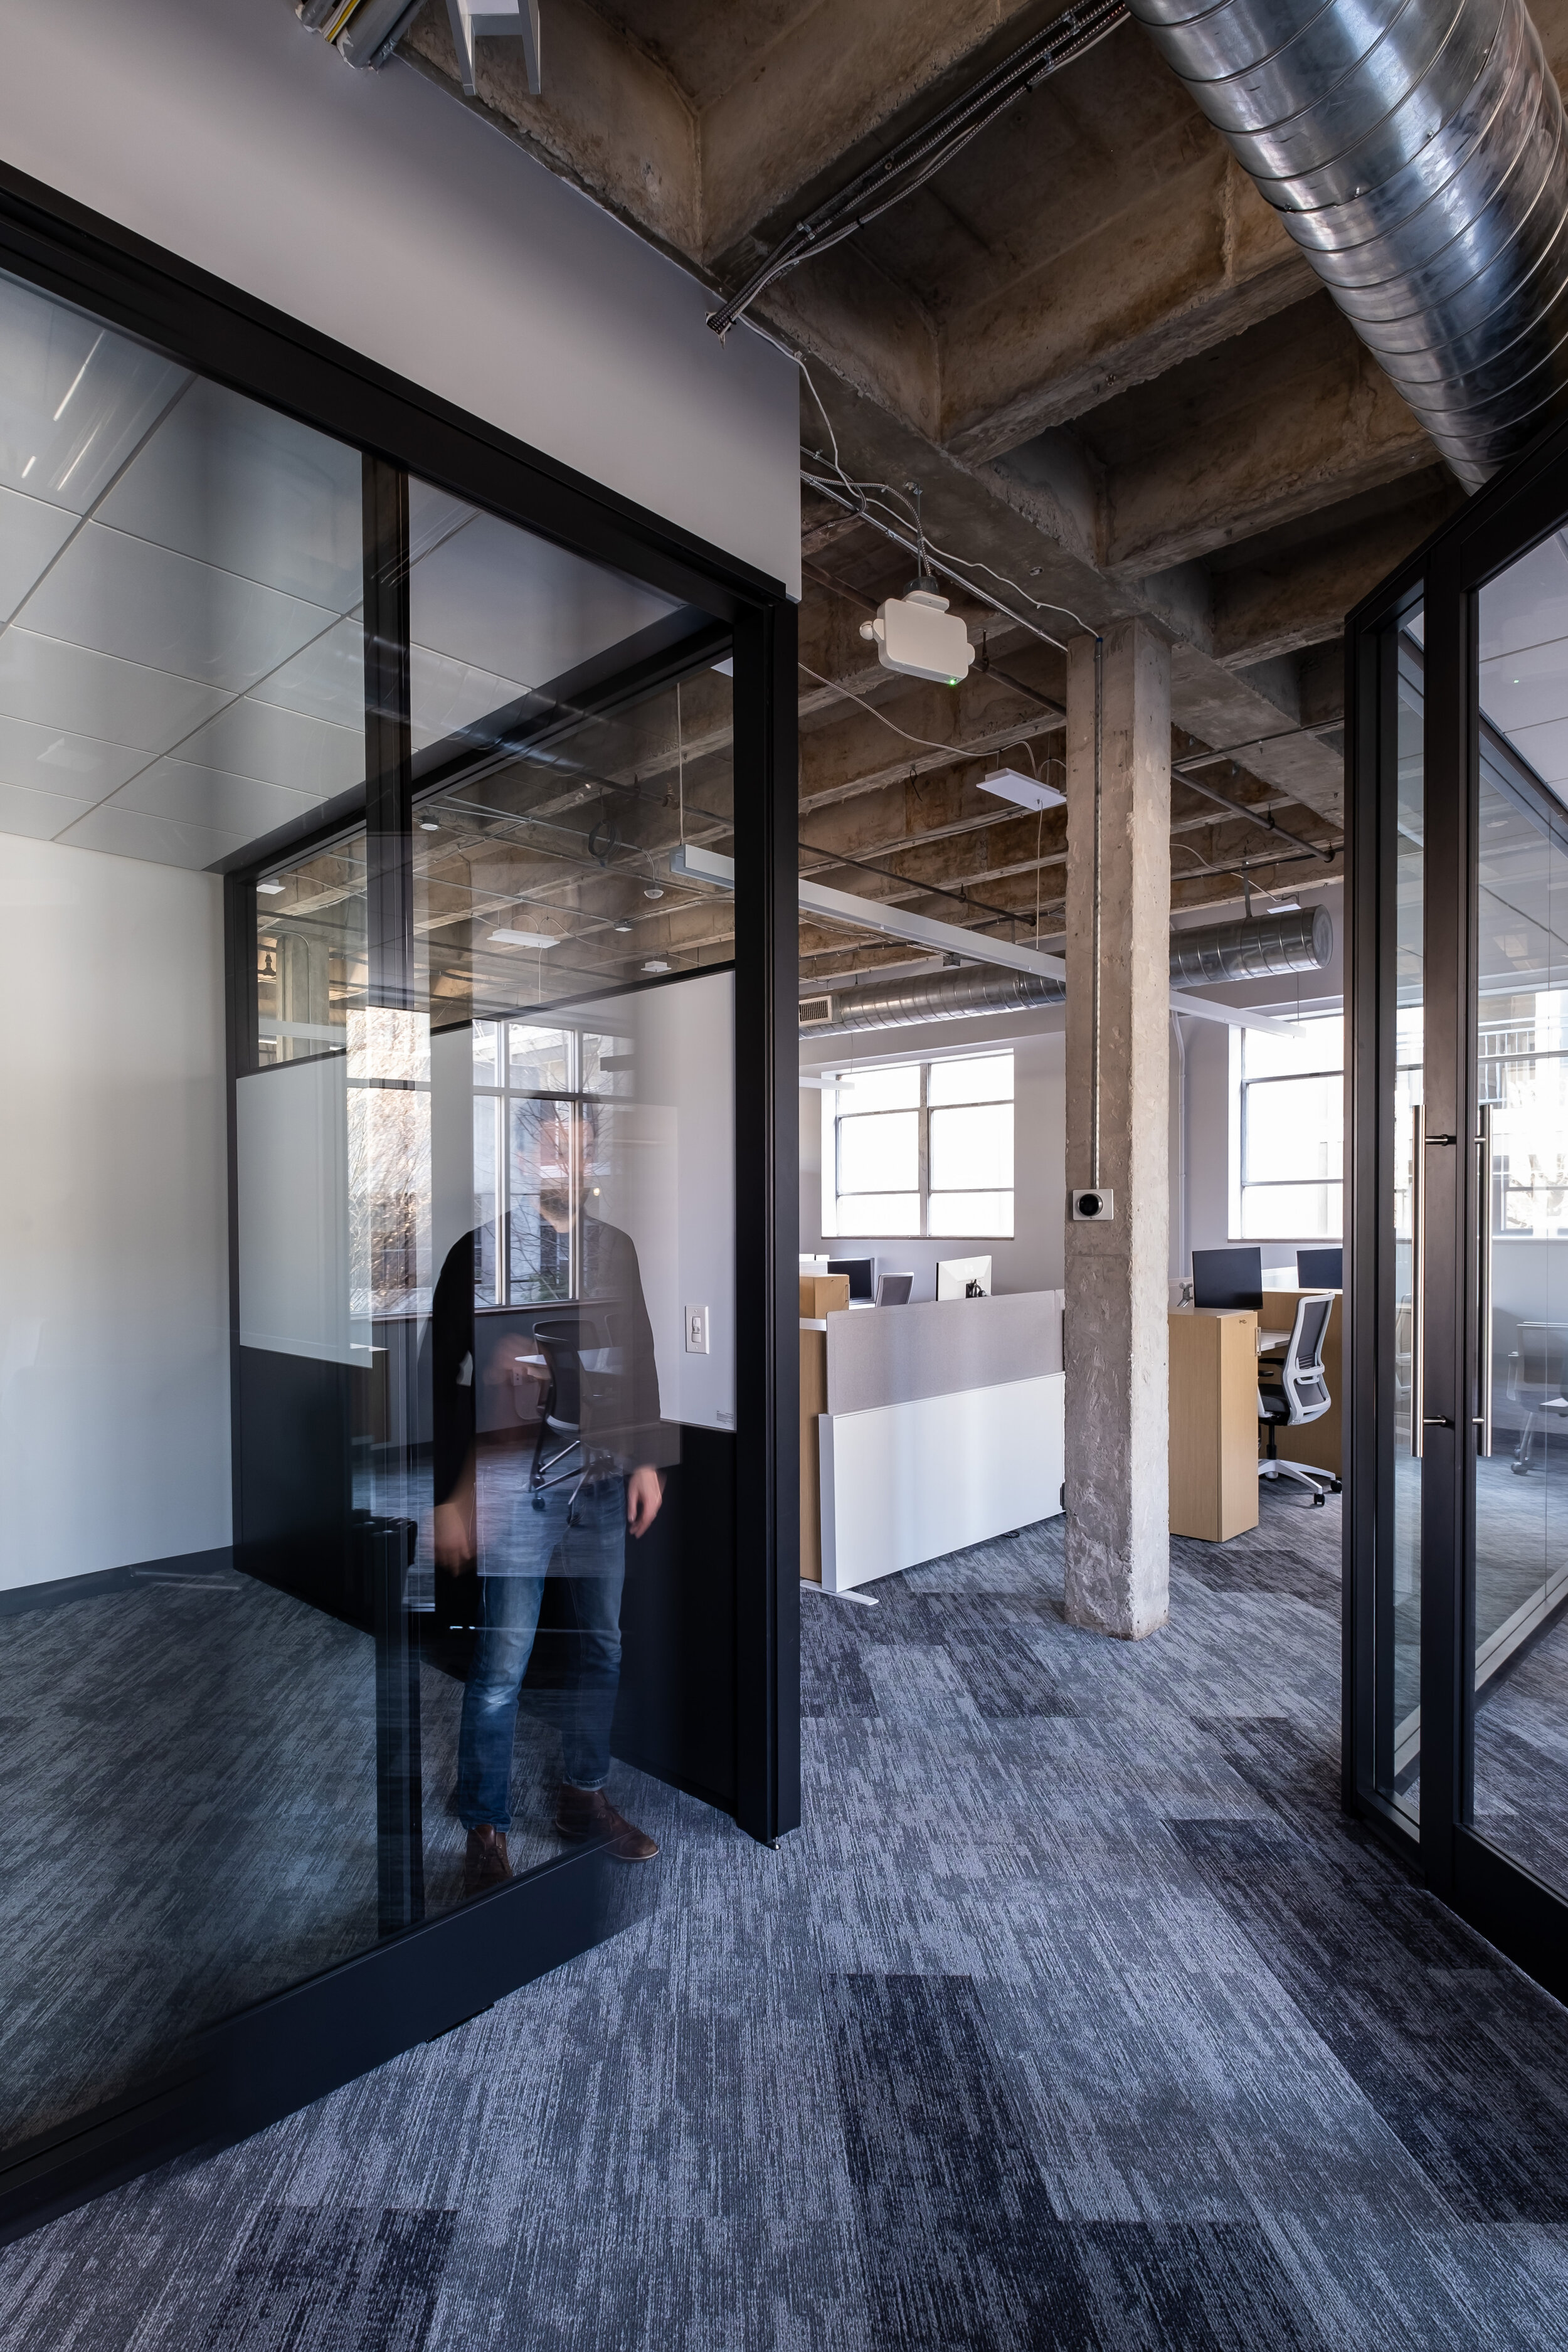  Blue Horse Office Space -  Local Architects  